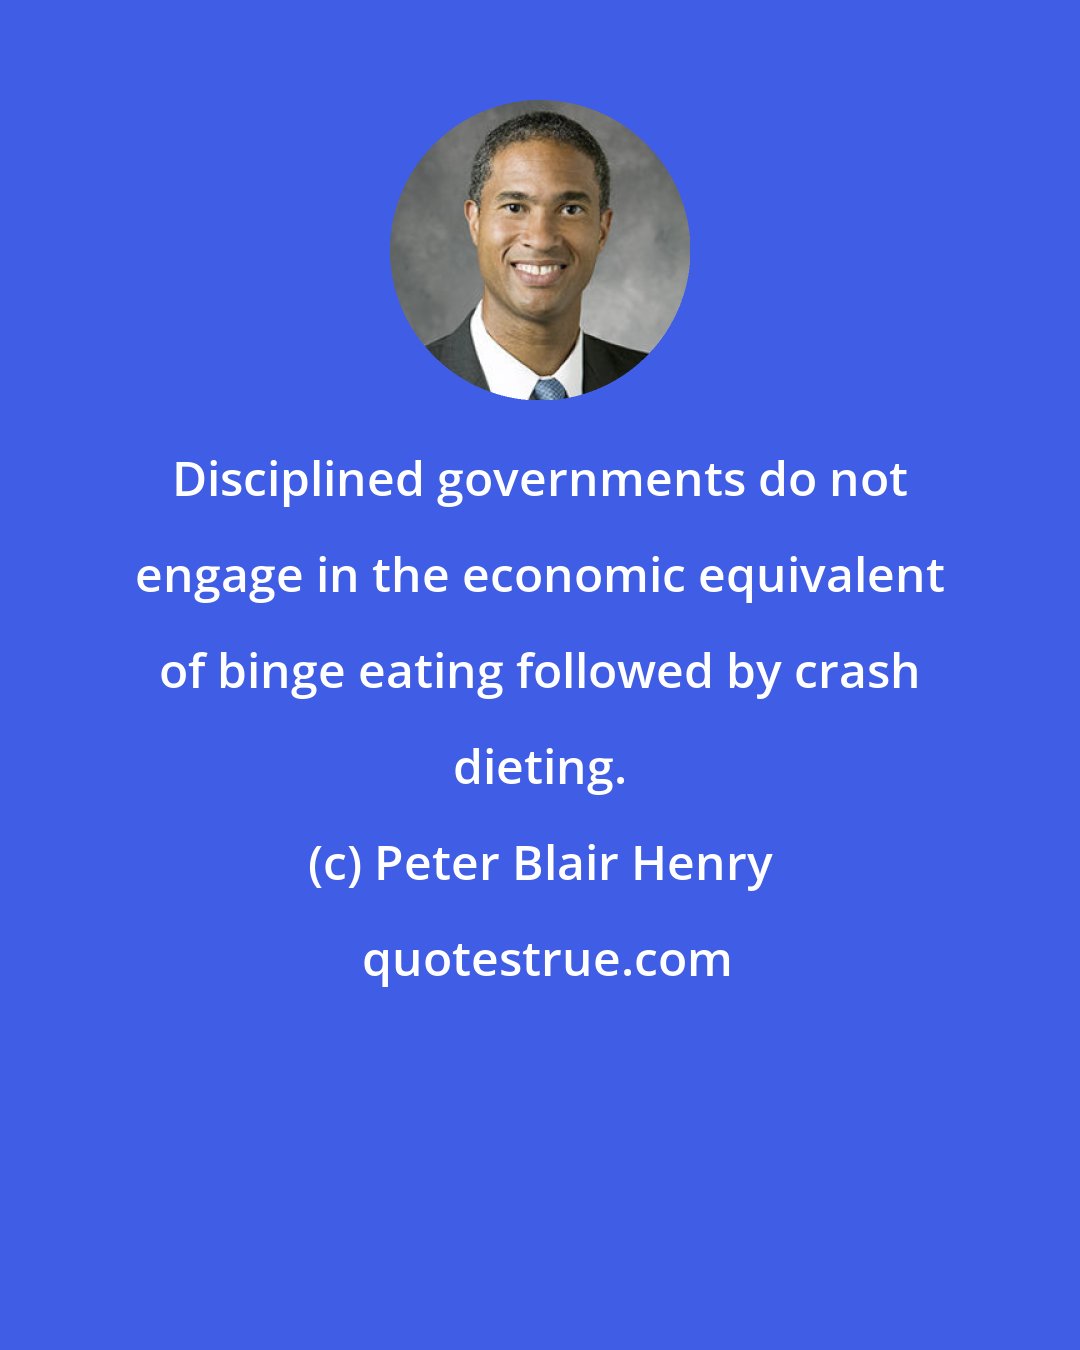 Peter Blair Henry: Disciplined governments do not engage in the economic equivalent of binge eating followed by crash dieting.